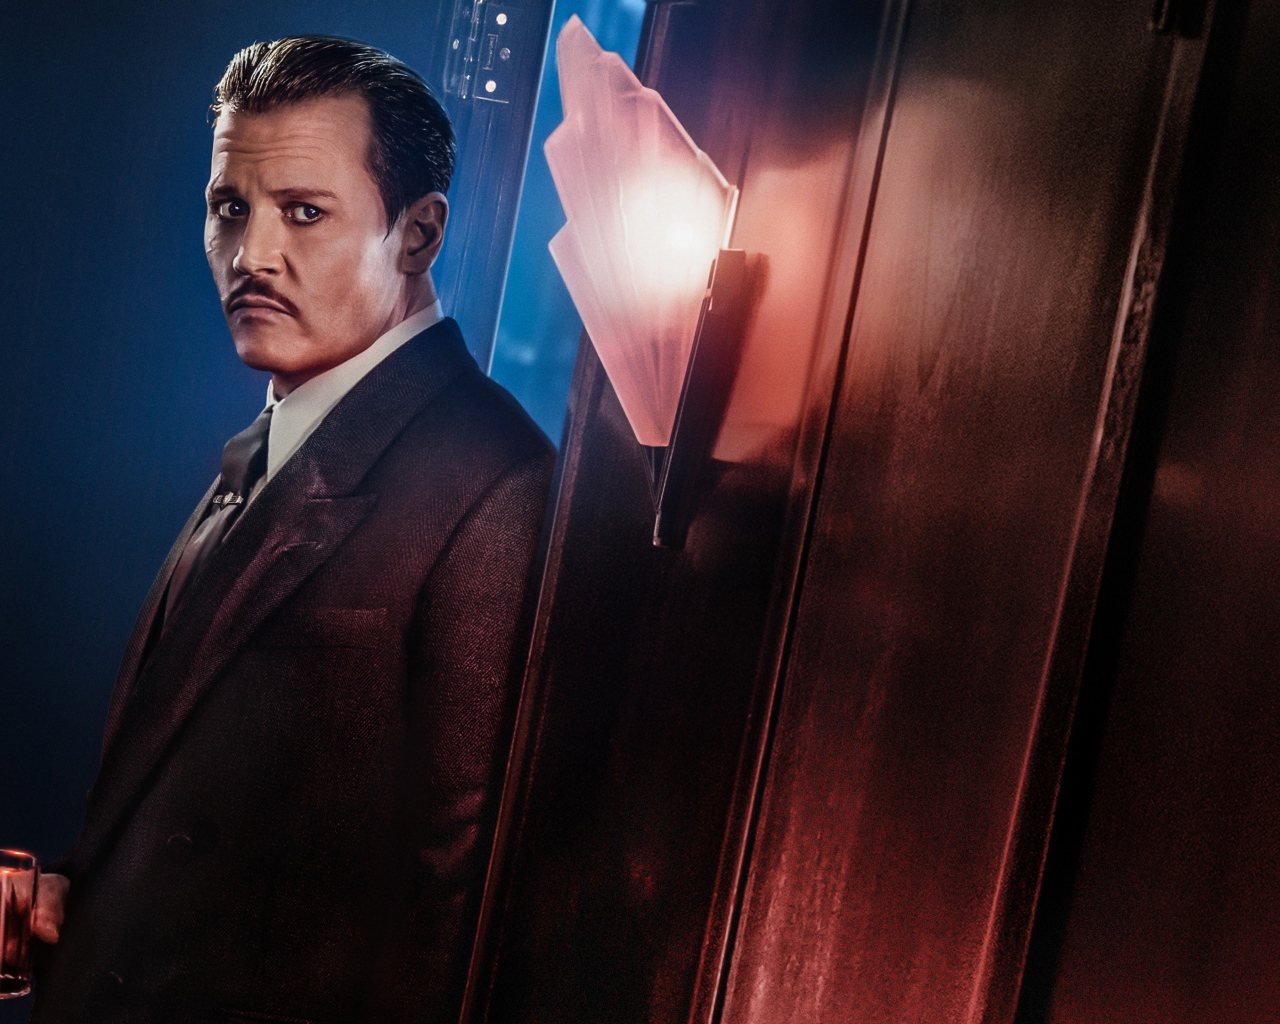 Actor Johnny Depp in the new movie Murder in the Orient Express, 2017